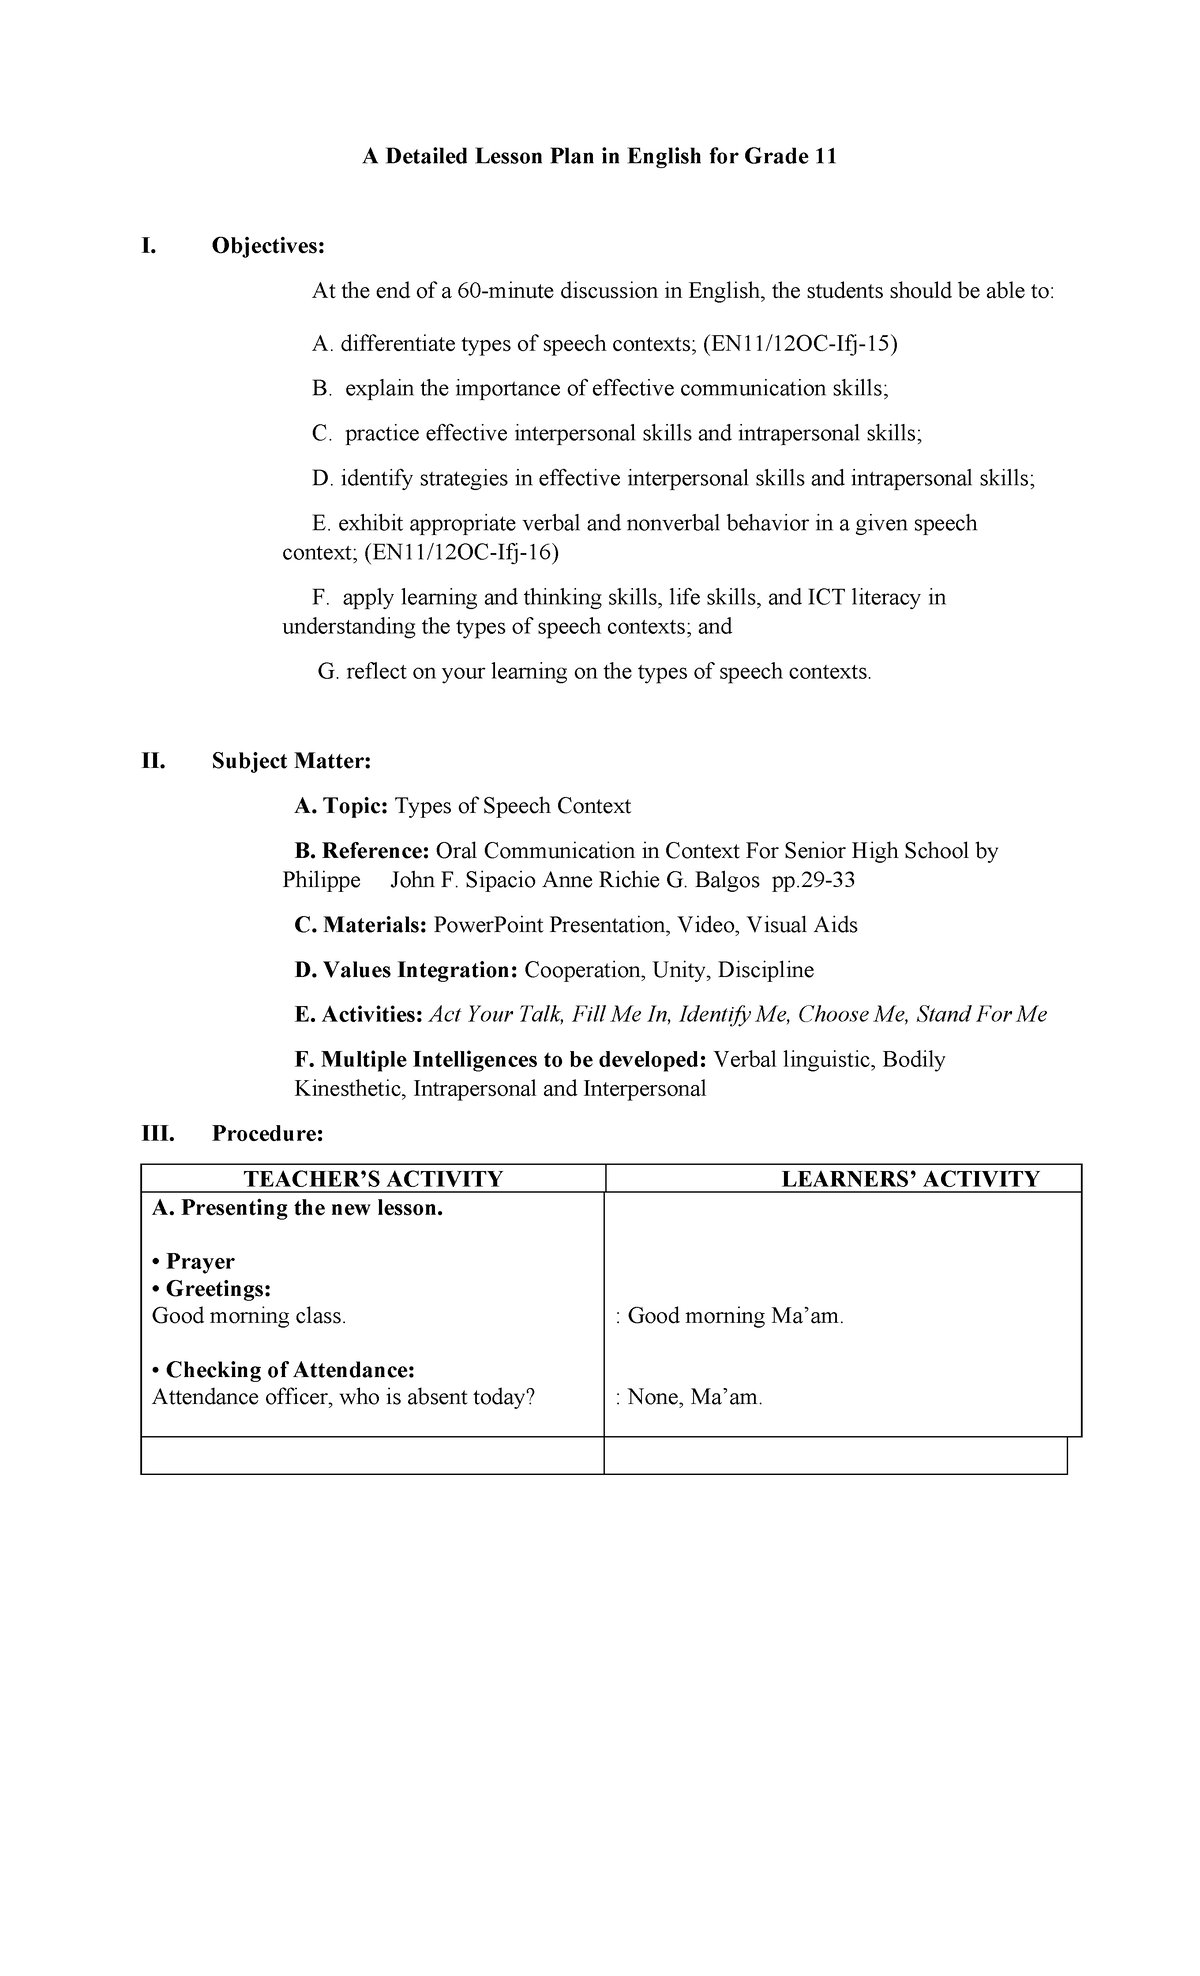 A detailed lesson plan in english for grade 11 oral communication 